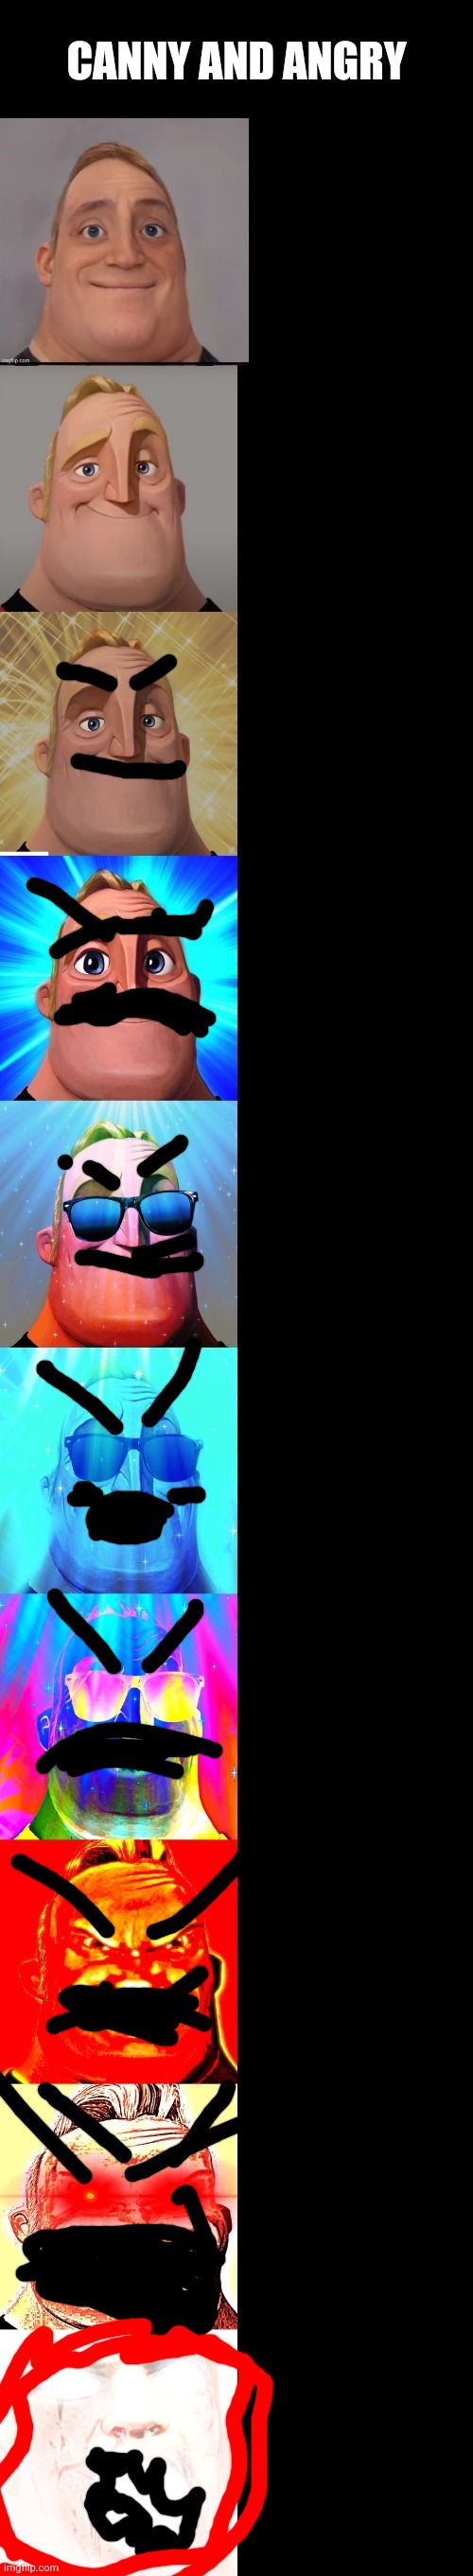 Mr incredible becoming angry and canny(sorry I haven't done one of these in a long time) | CANNY AND ANGRY | image tagged in mr incredible becoming canny | made w/ Imgflip meme maker